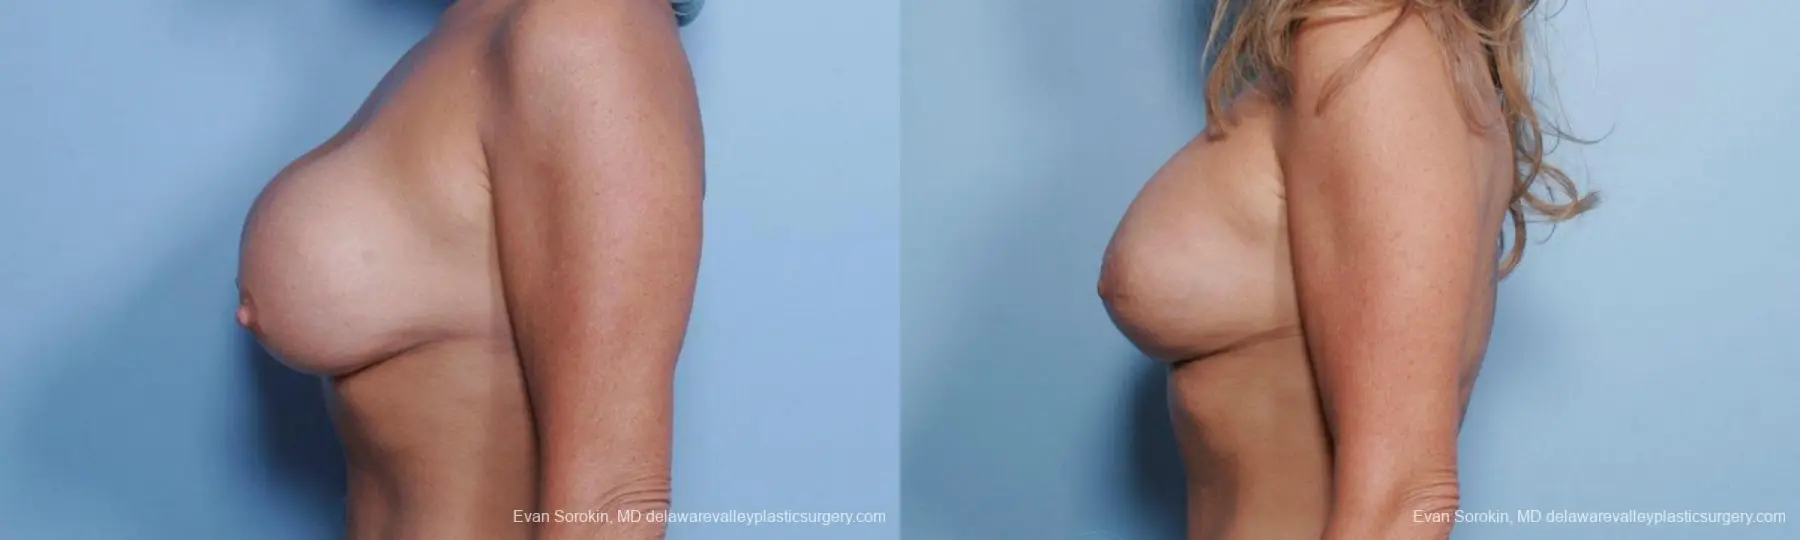 Philadelphia Breast Lift and Augmentation 9453 - Before and After 4